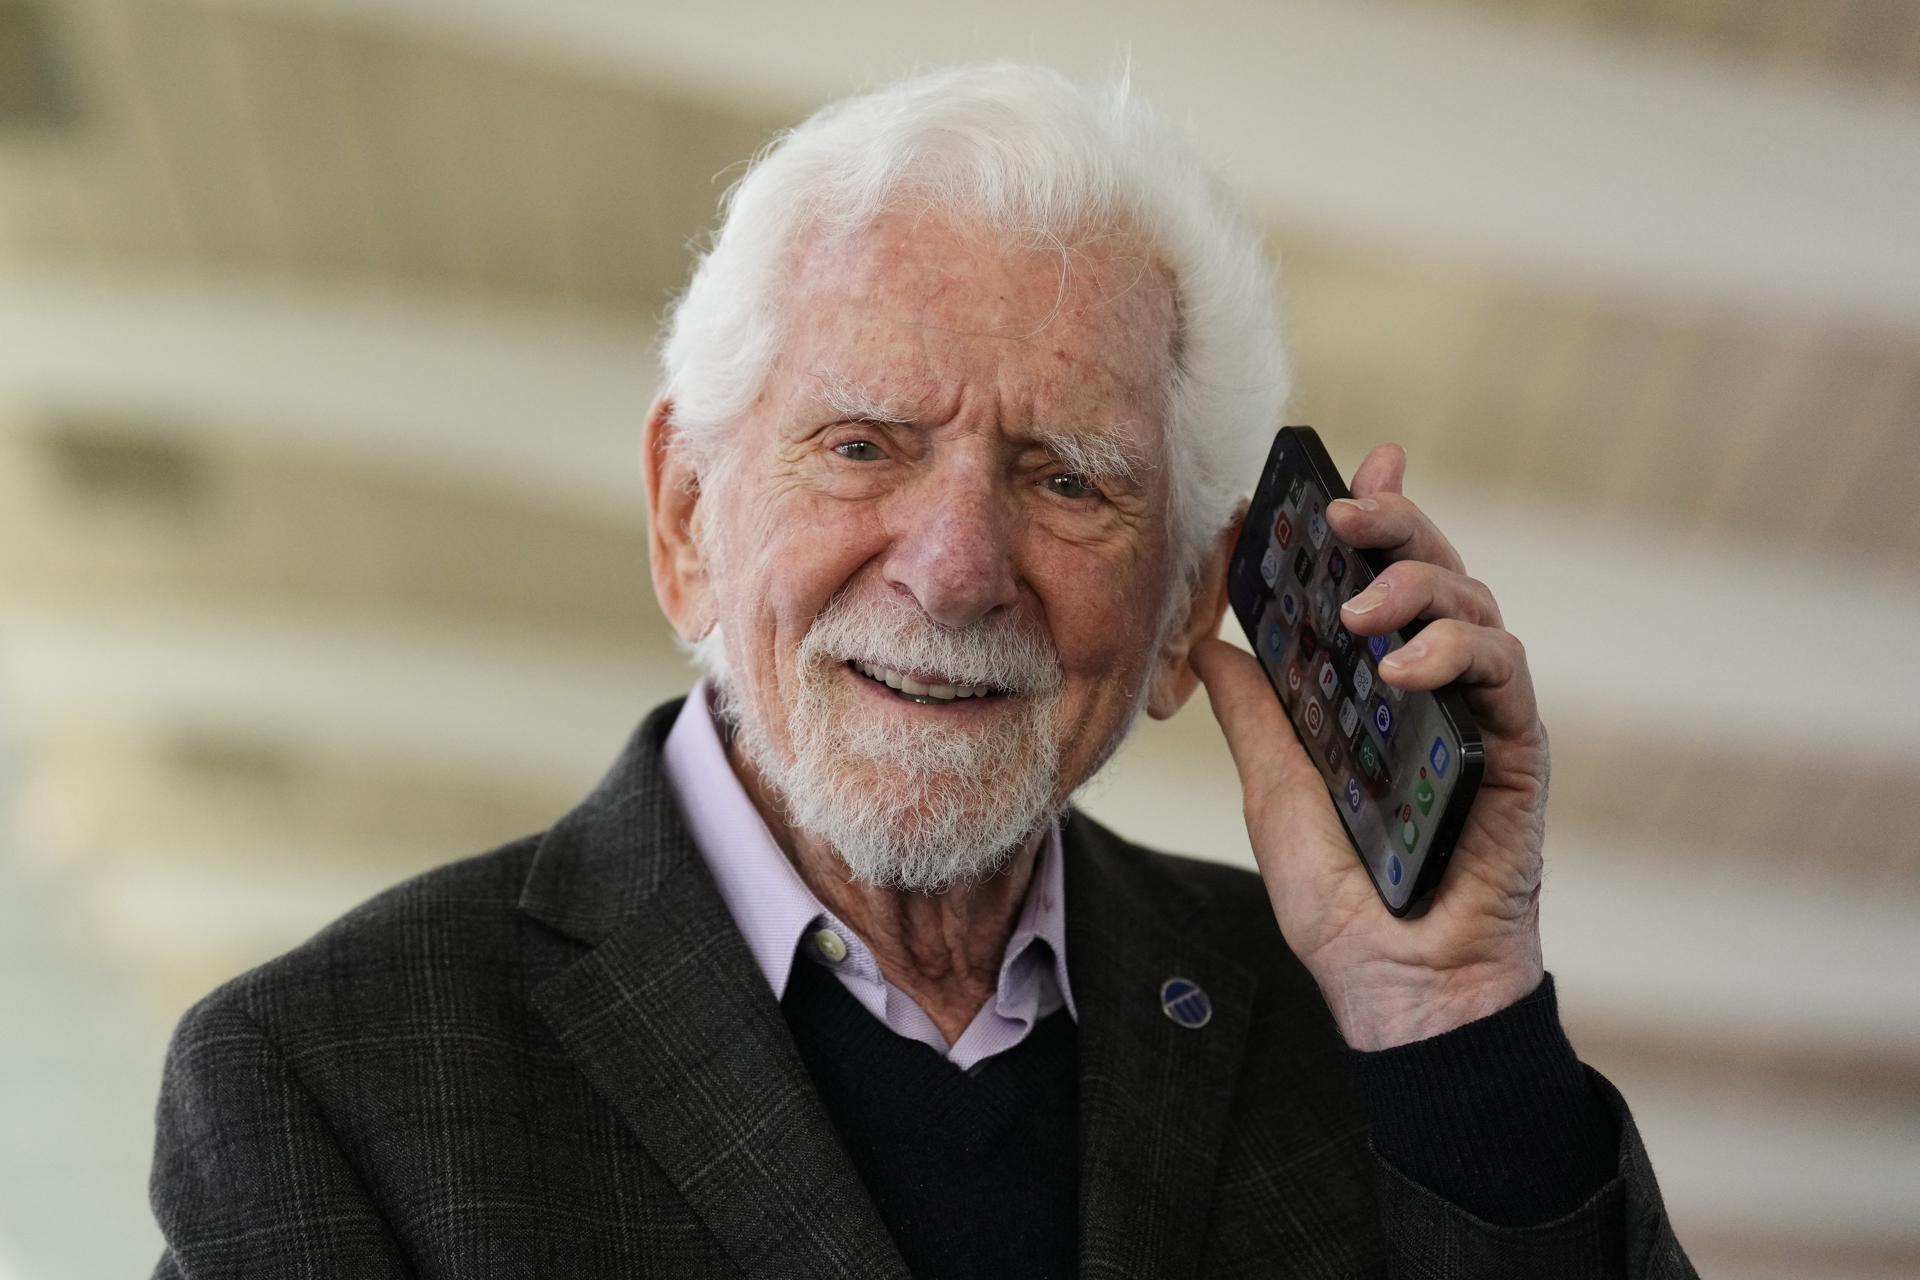 American engineer Martin Cooper, inventor of the cellphone, at the Mobile World Congress in Barcelona, Spain. EFE/Alejandro Garcia